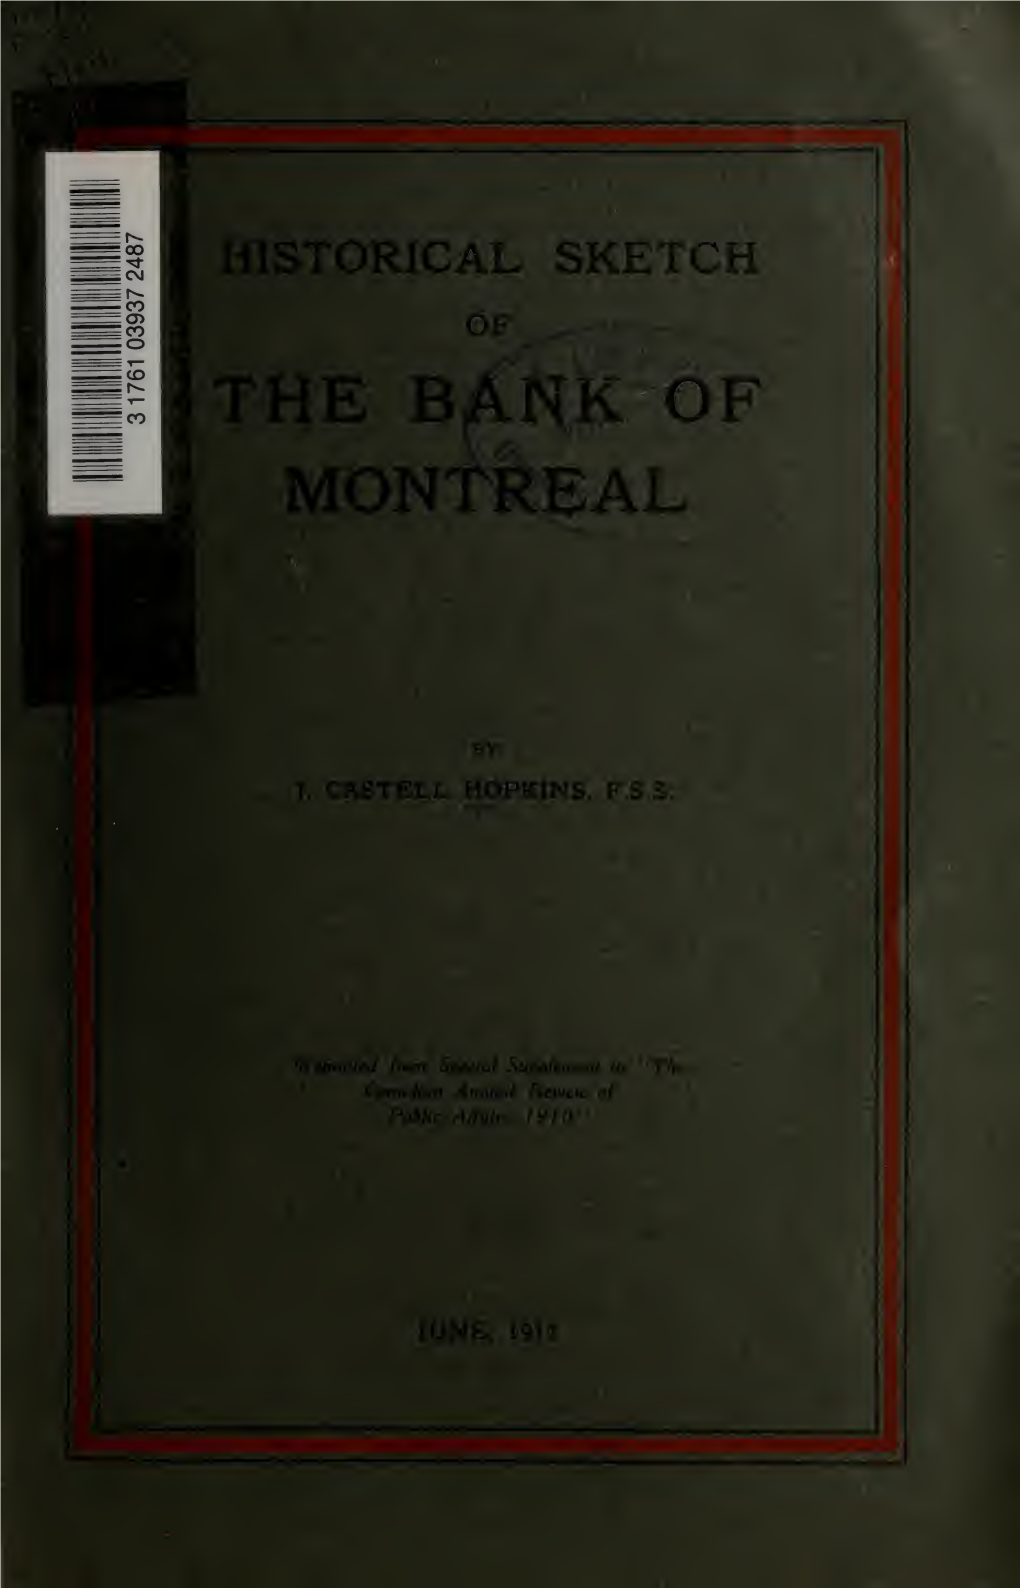 Historical Sketch of the Bank of Montreal